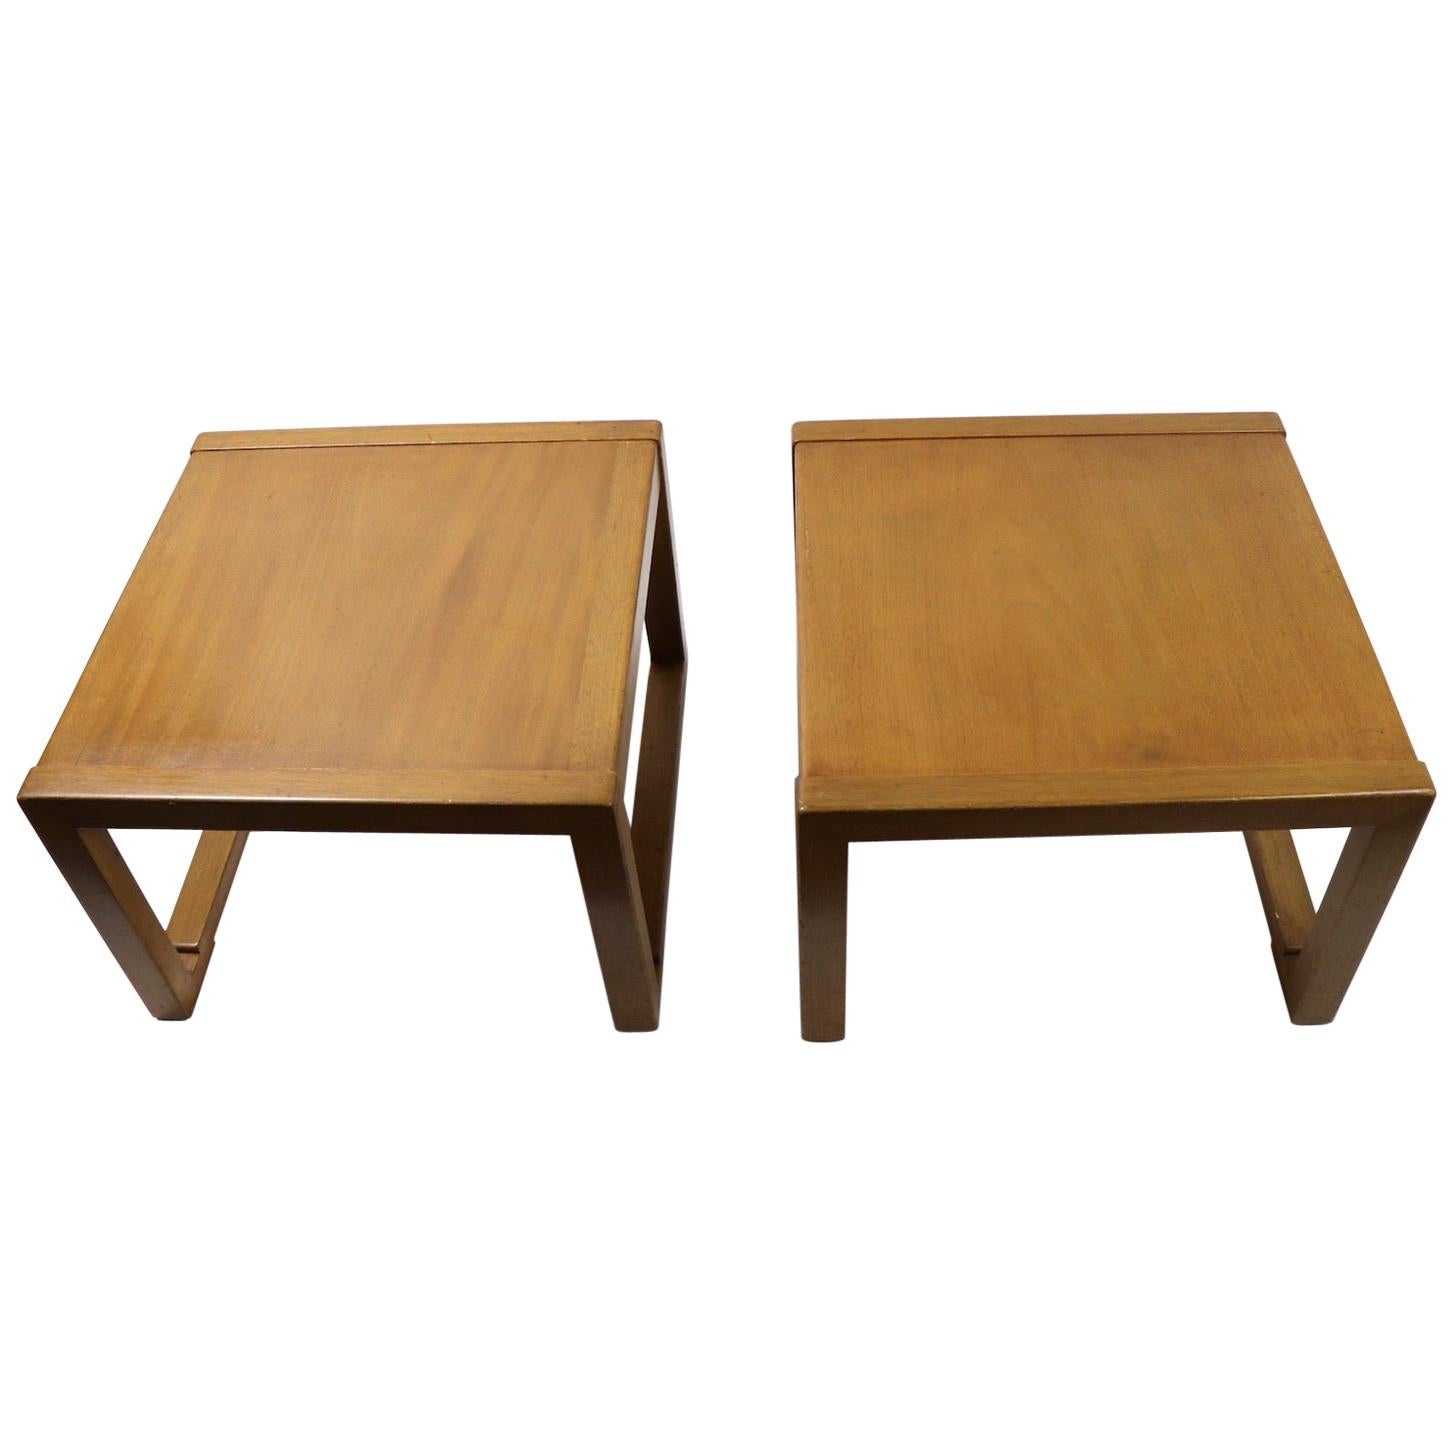 Pair of Tables designed by Wormley for Dunbar